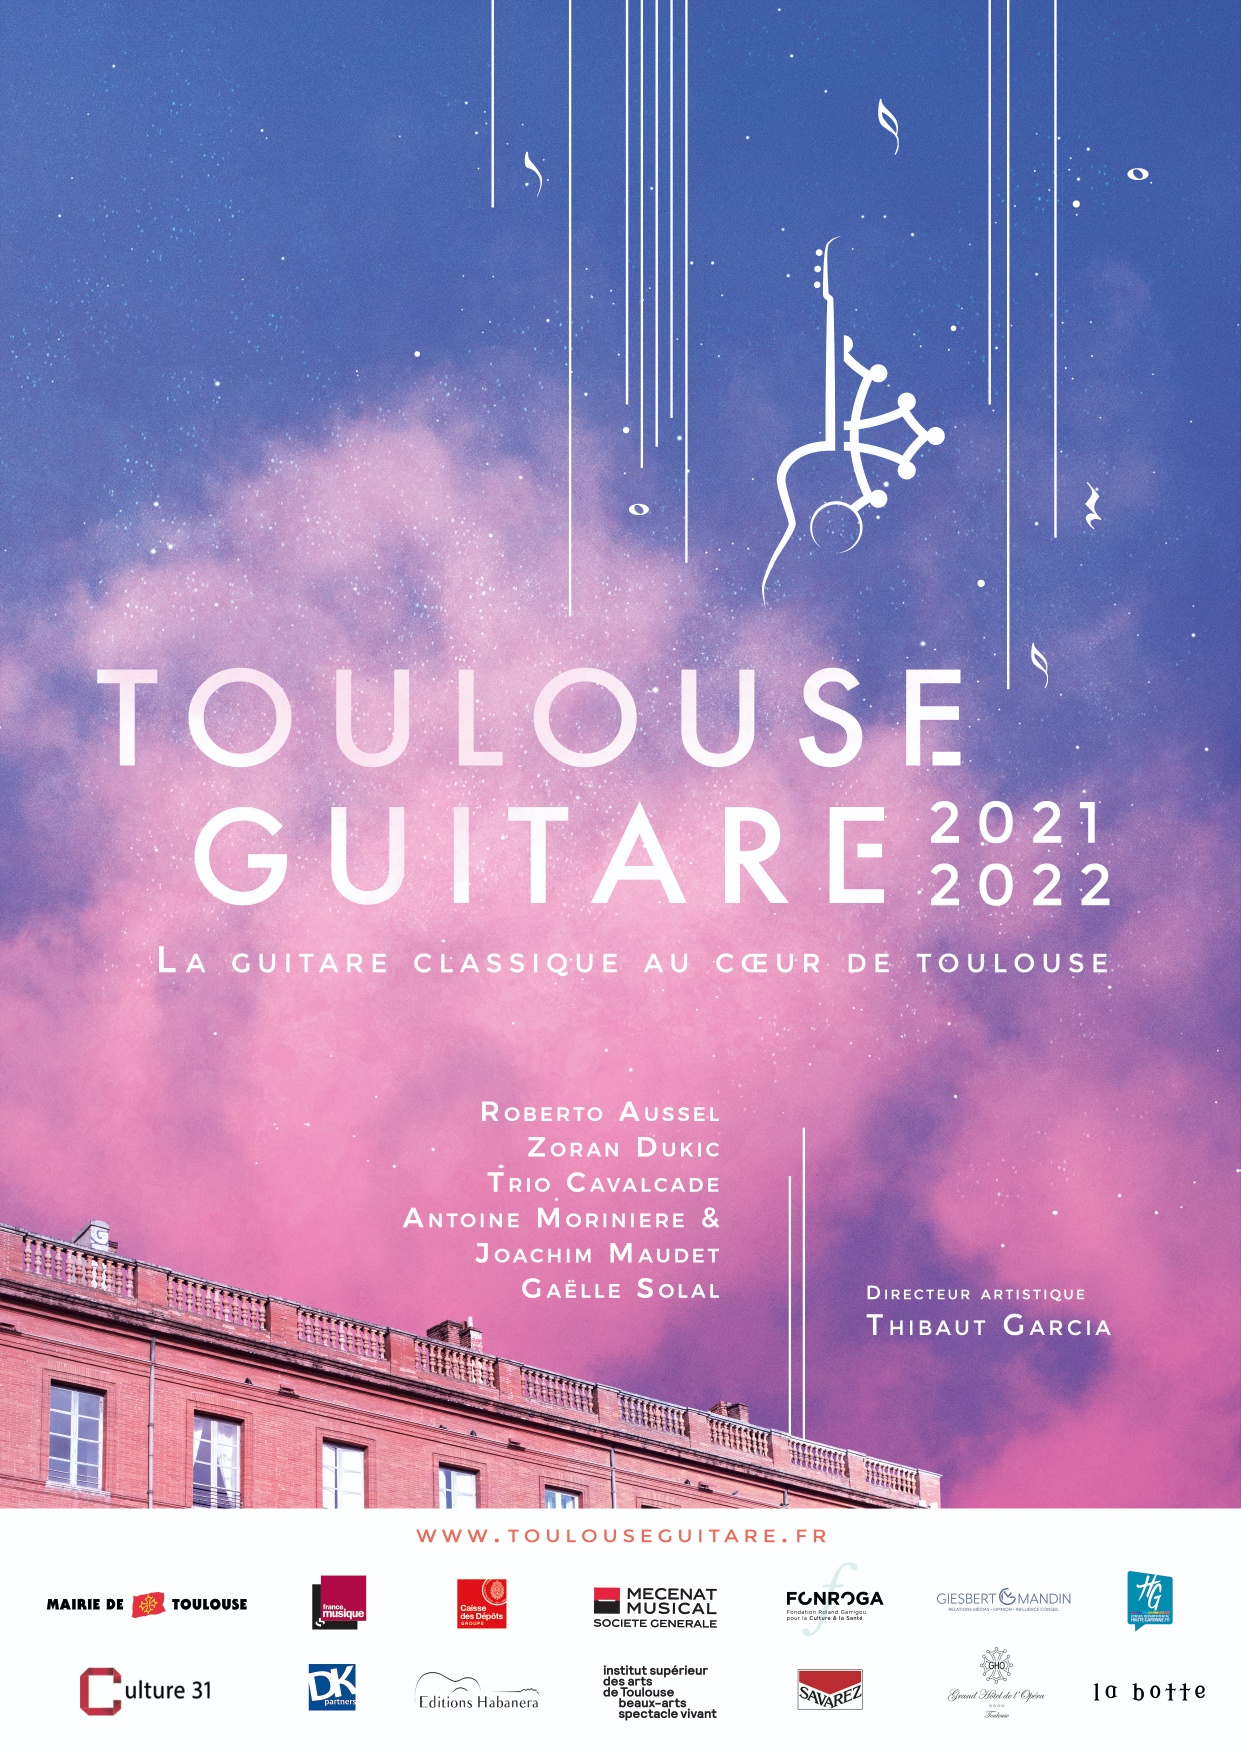 Toulouse Guitare 21:22